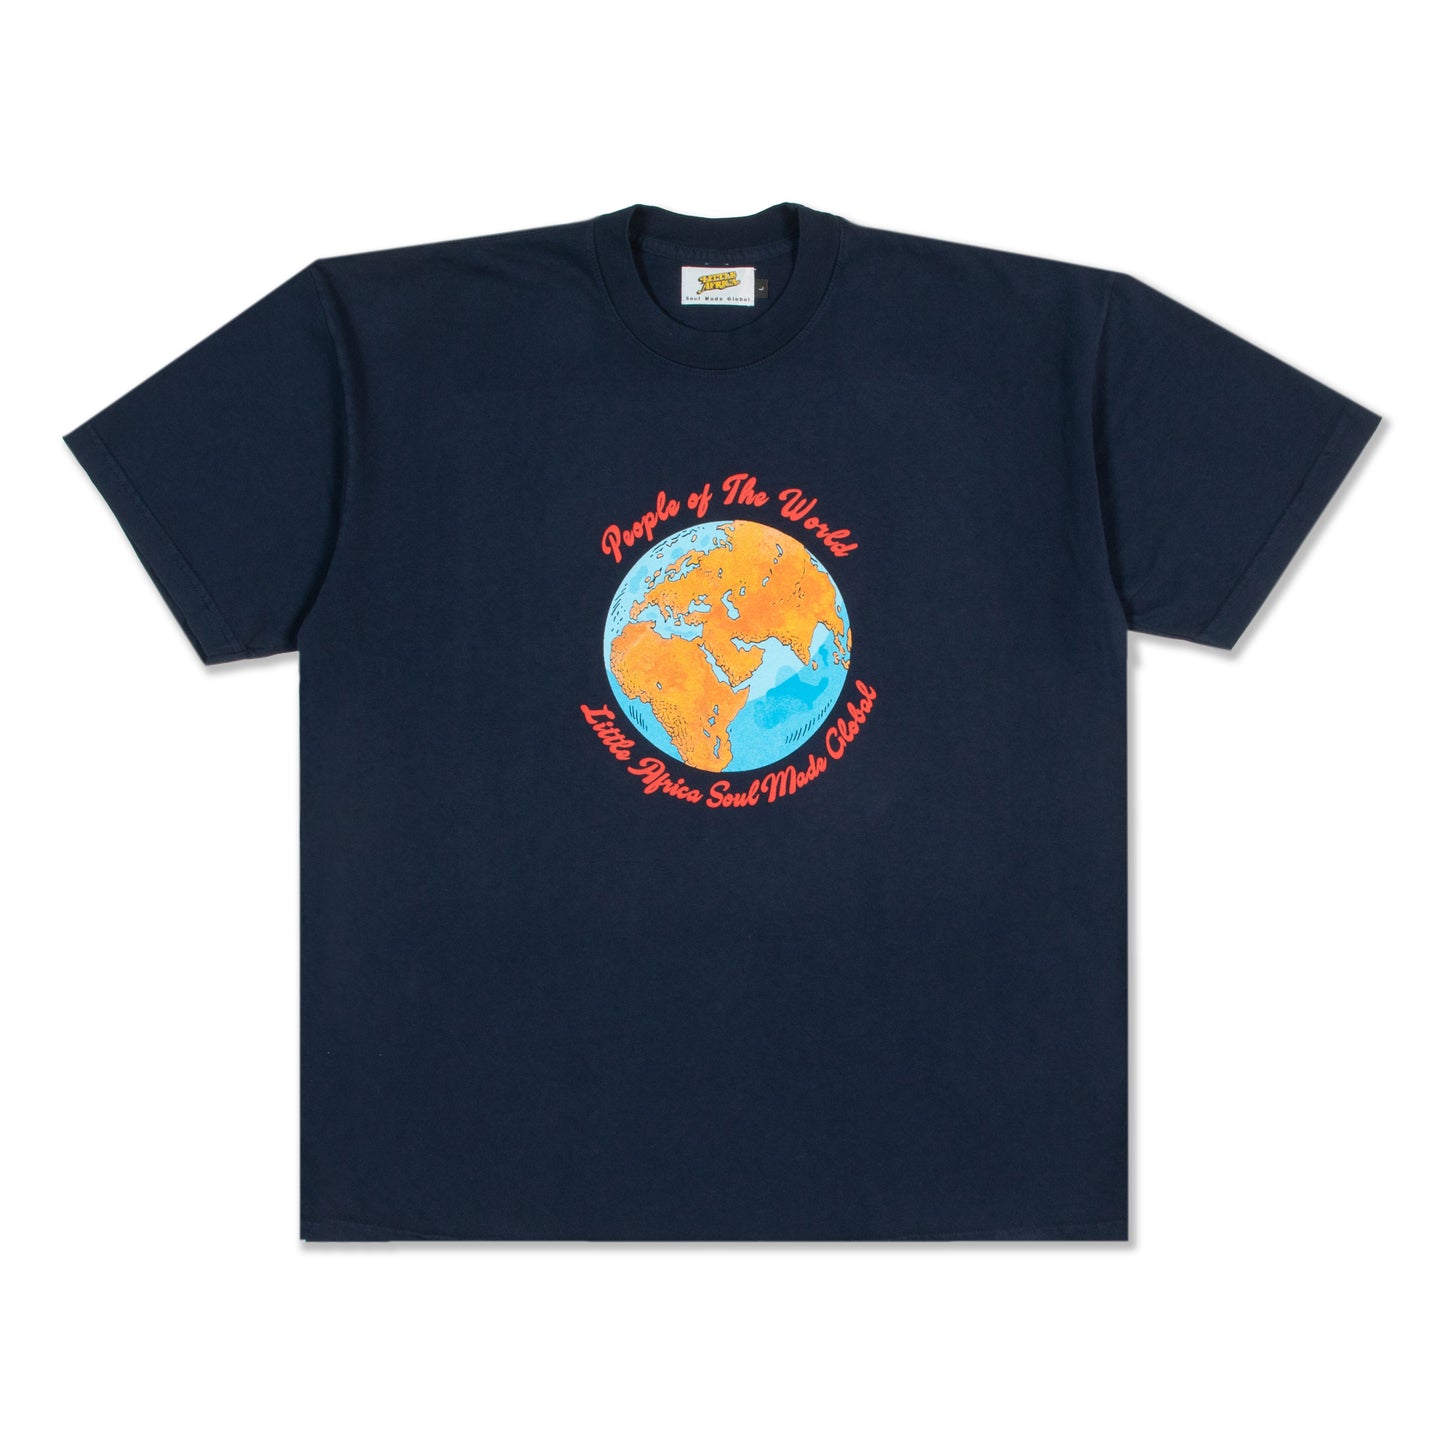 LITTLE AFRICA "People of The World Tee" (Navy)